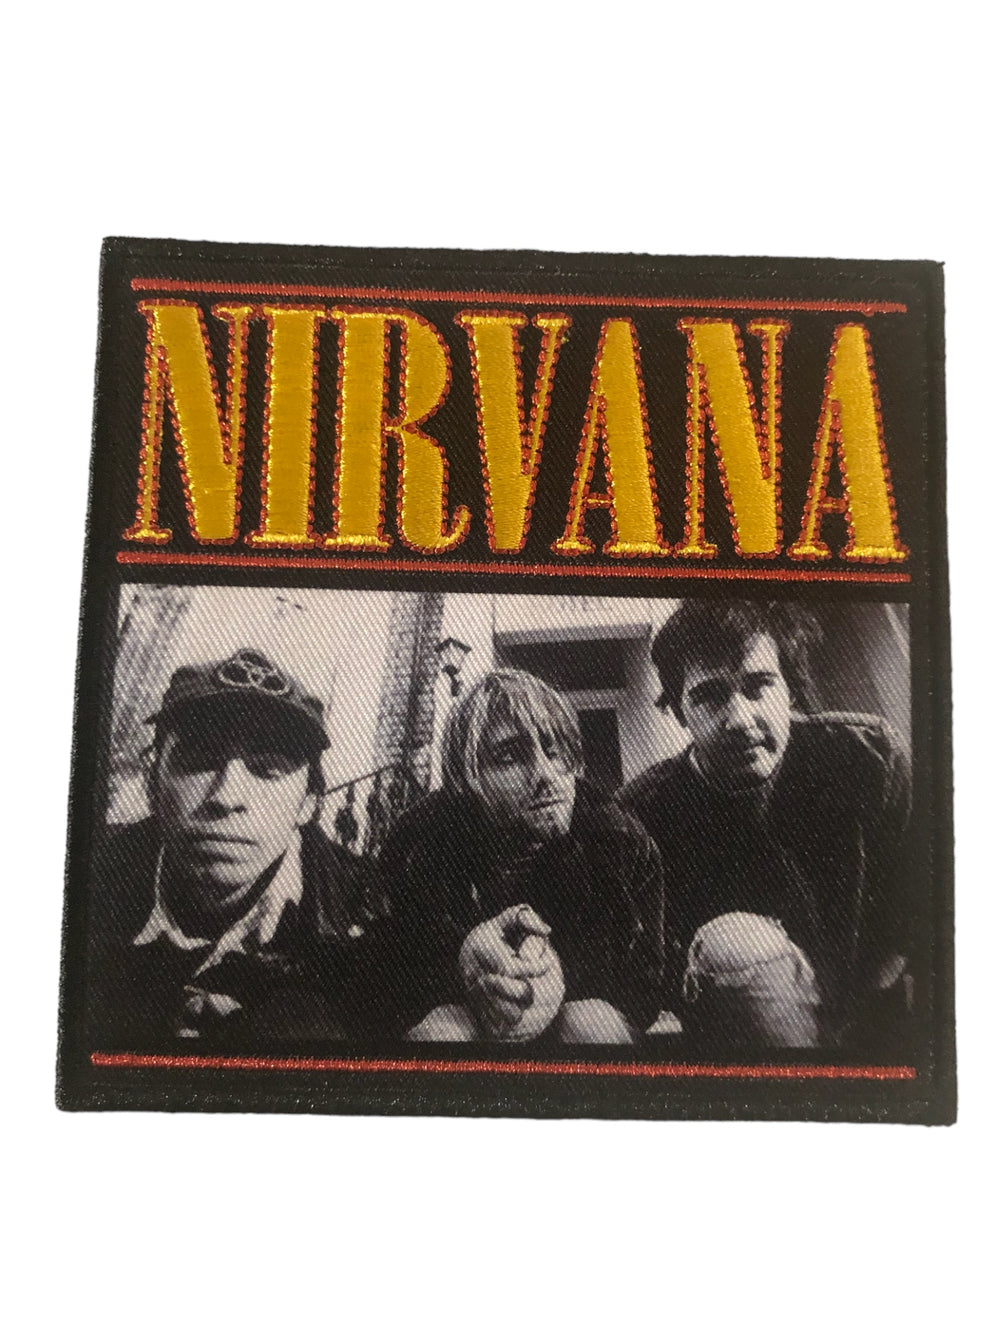 Nirvana London Photo Official Woven Patch Brand New